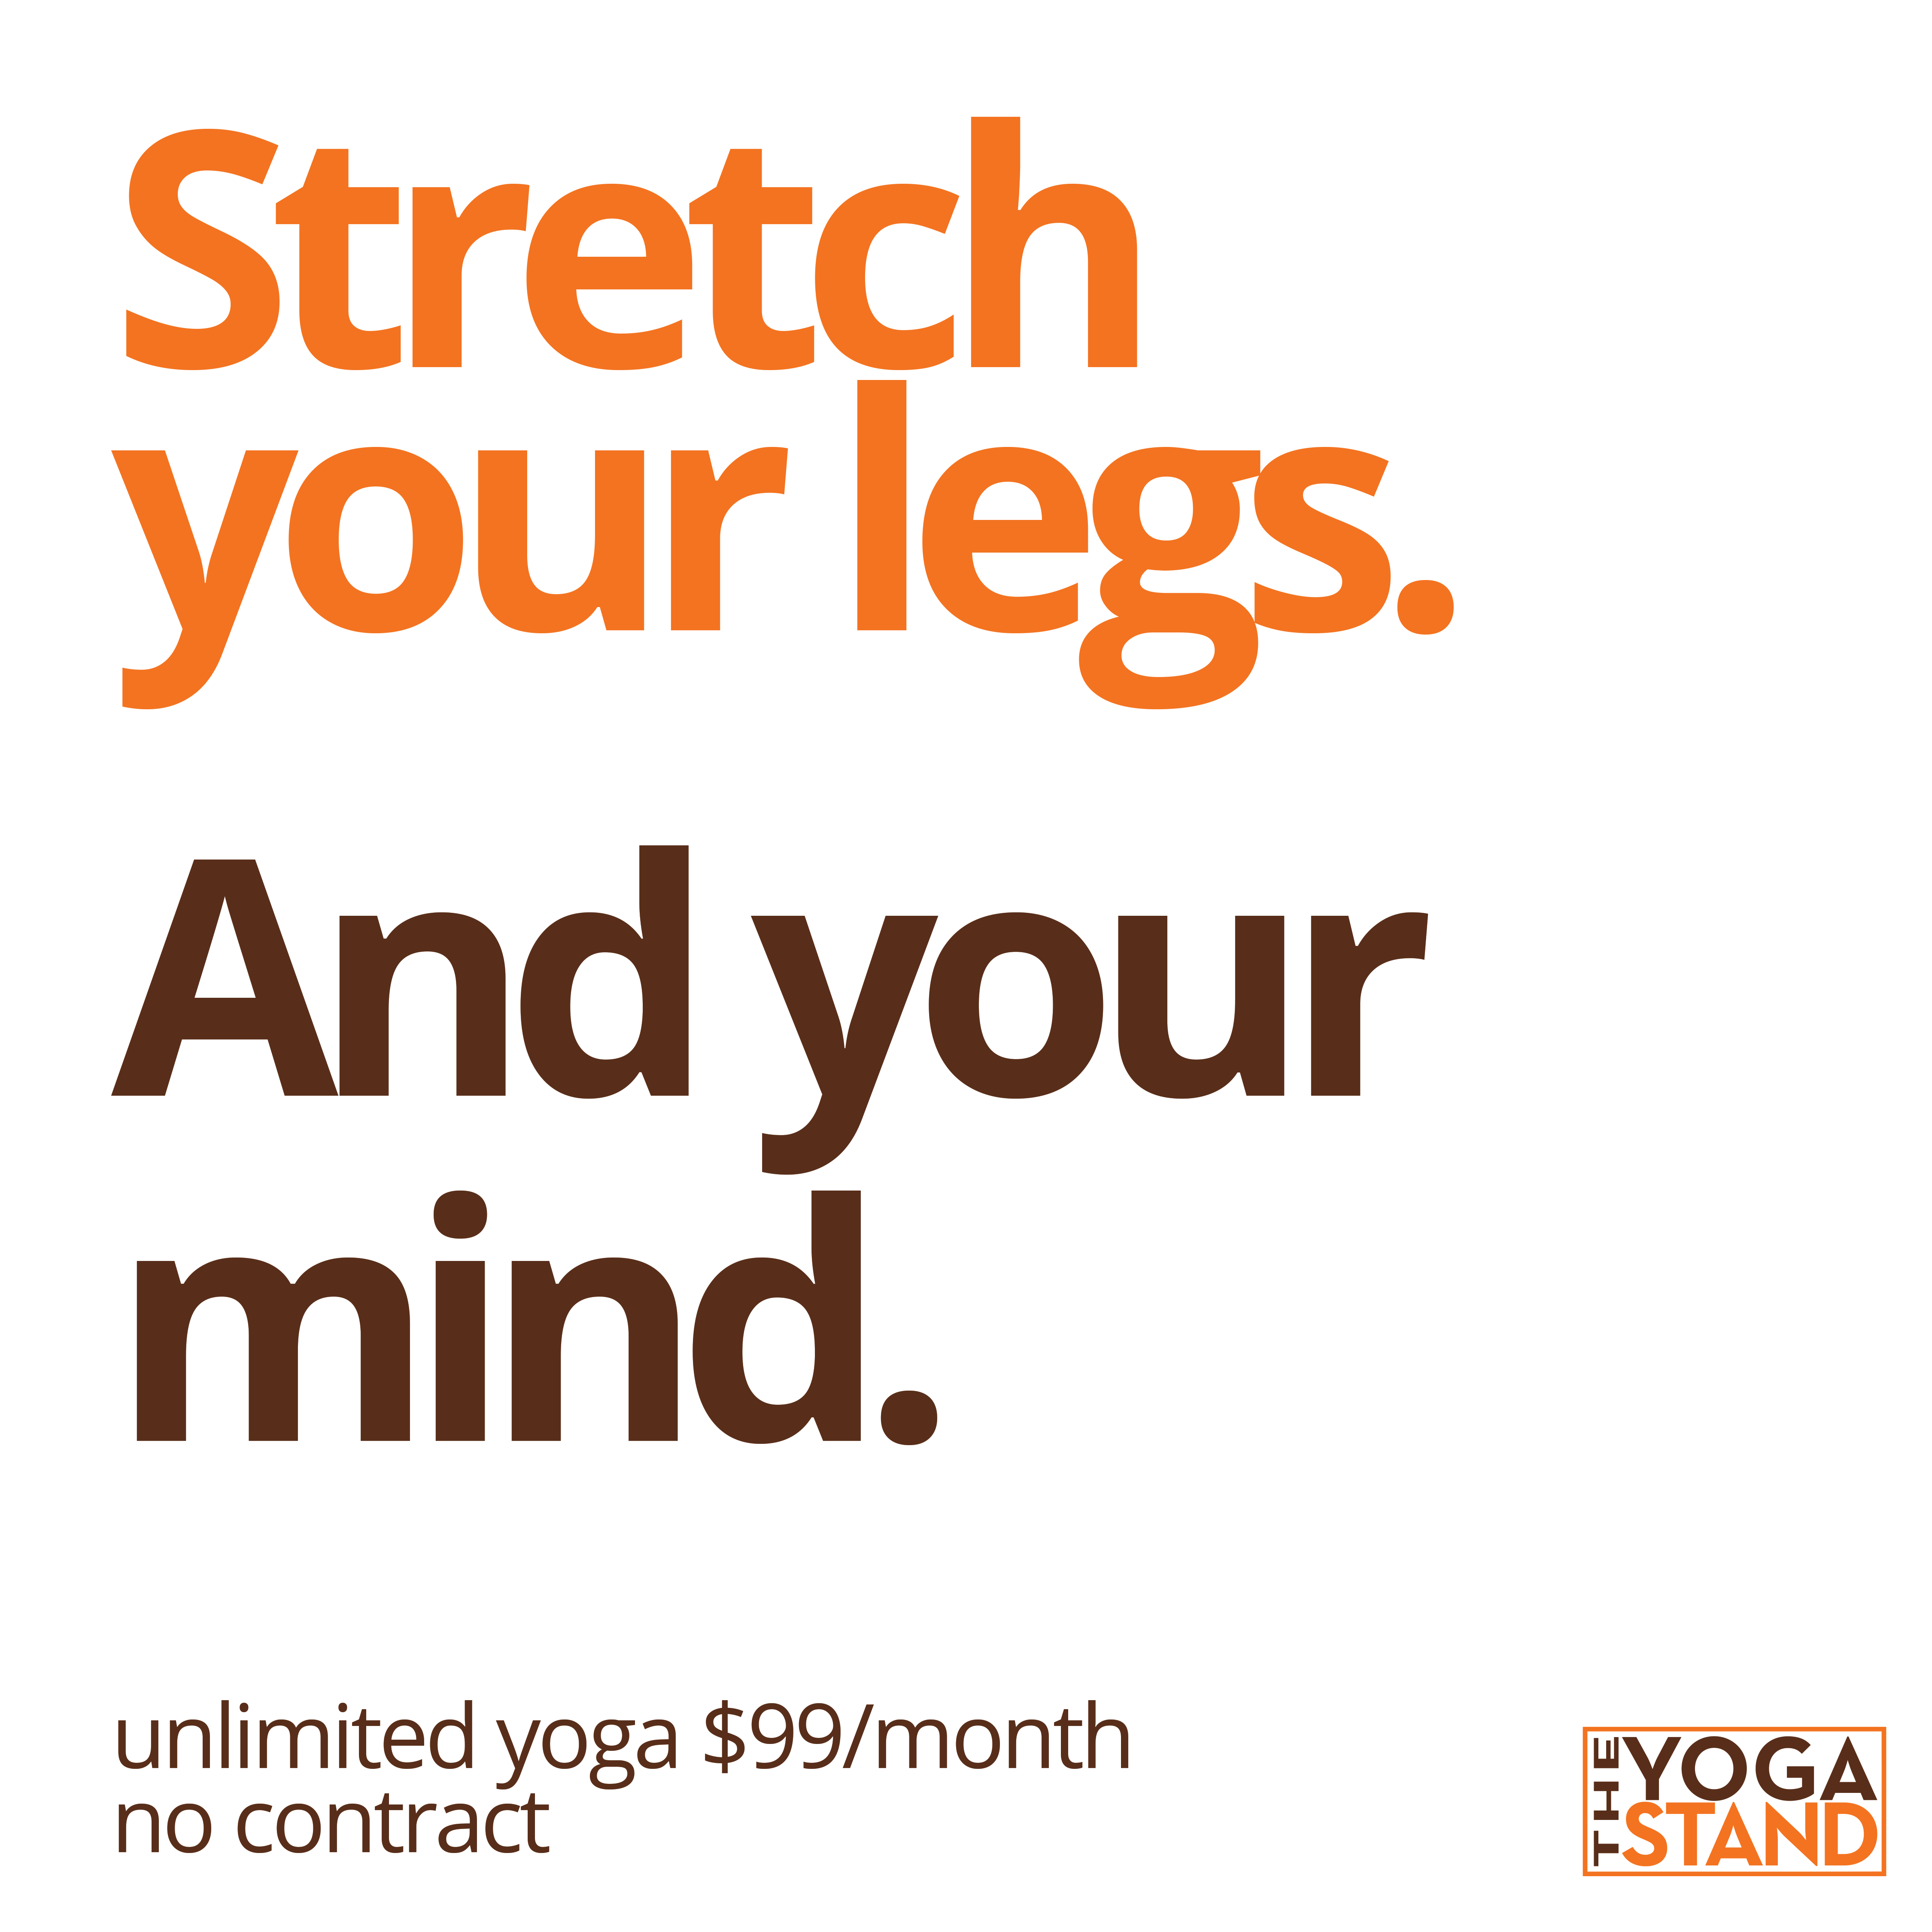 Stretch your legs and your mind.